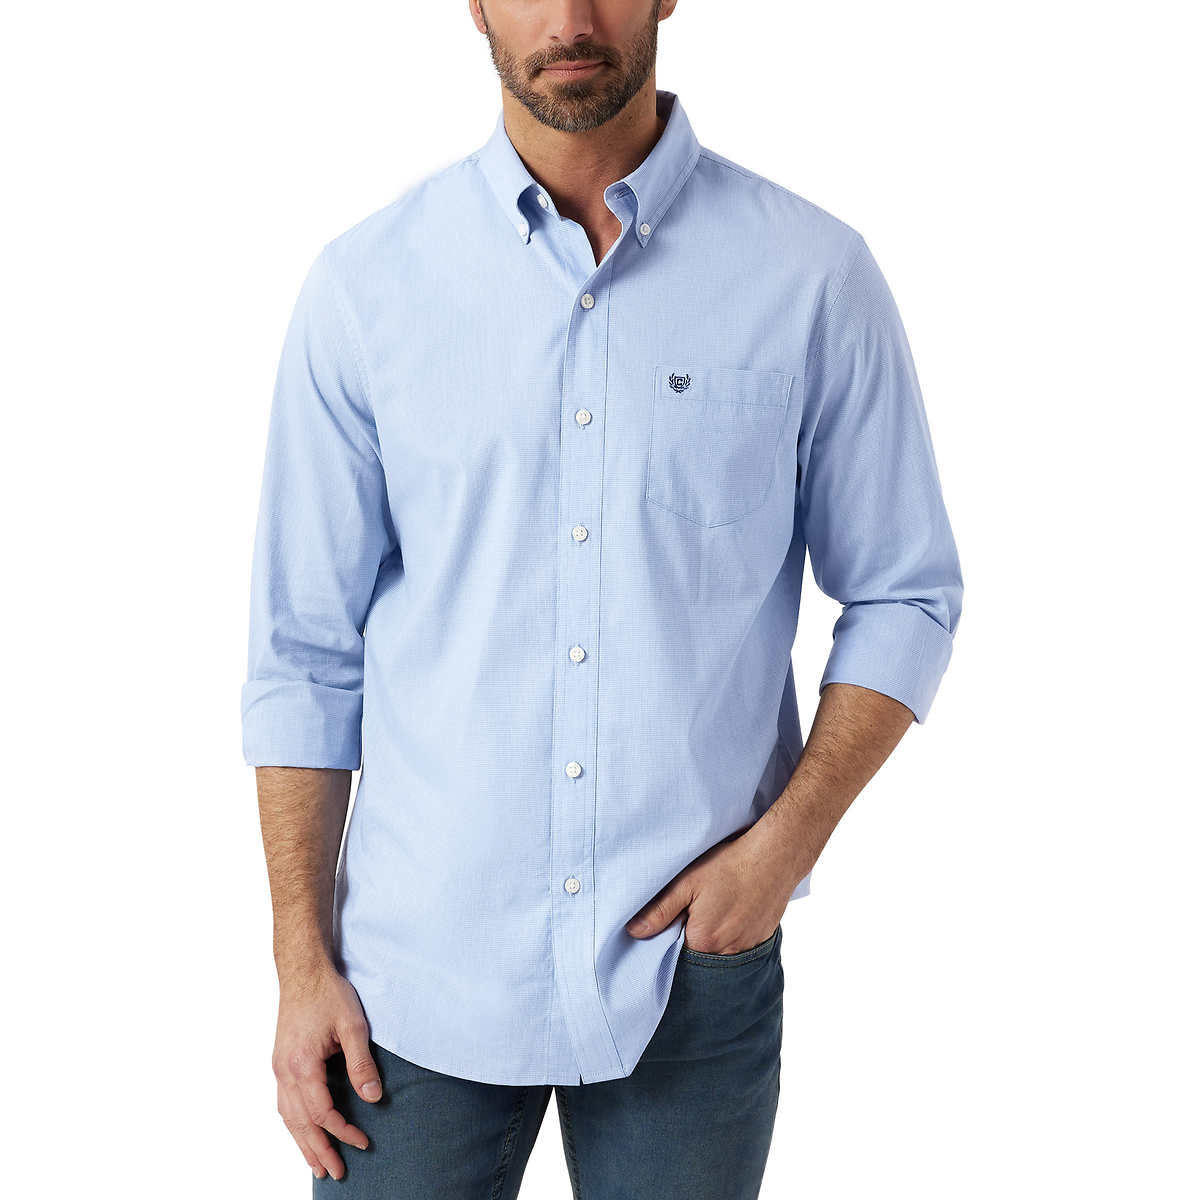 Avalanche Outdoor Supply Company Mens Button Down Short Sleeve